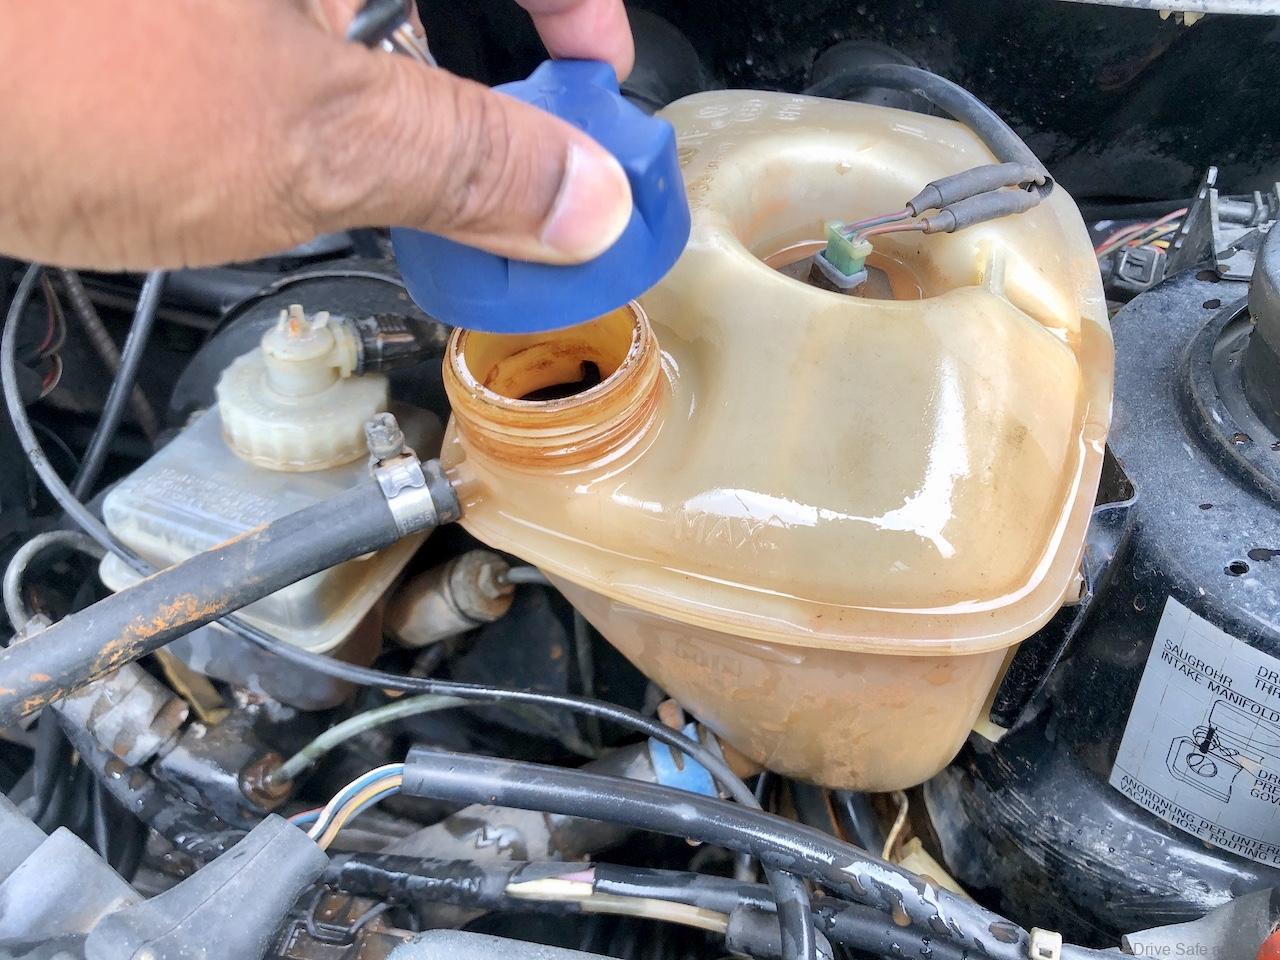 What Happens If You Drive With Low Coolant?